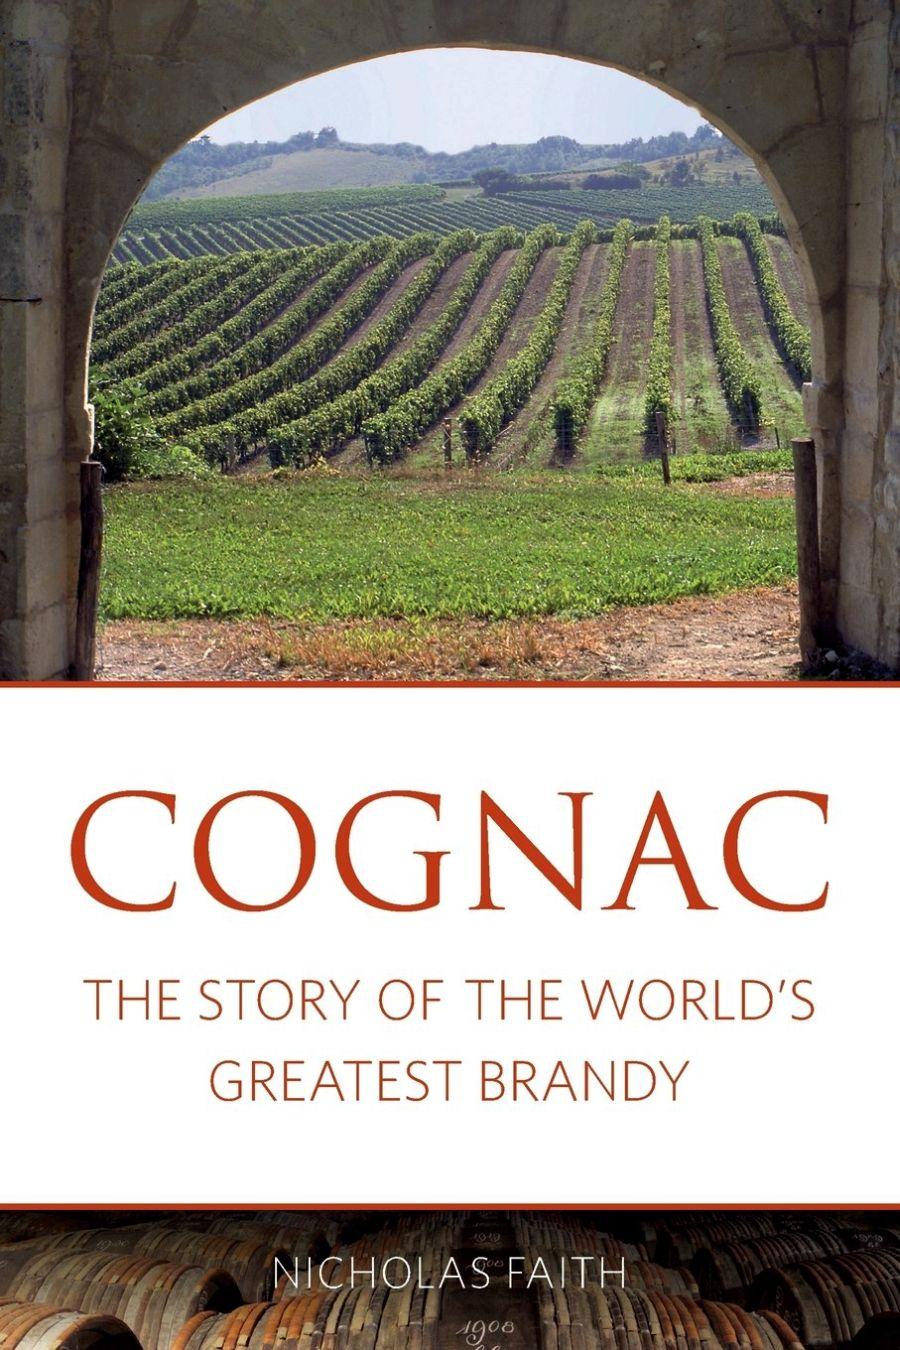 Cognac: The Story of the World's Greatest Brandy